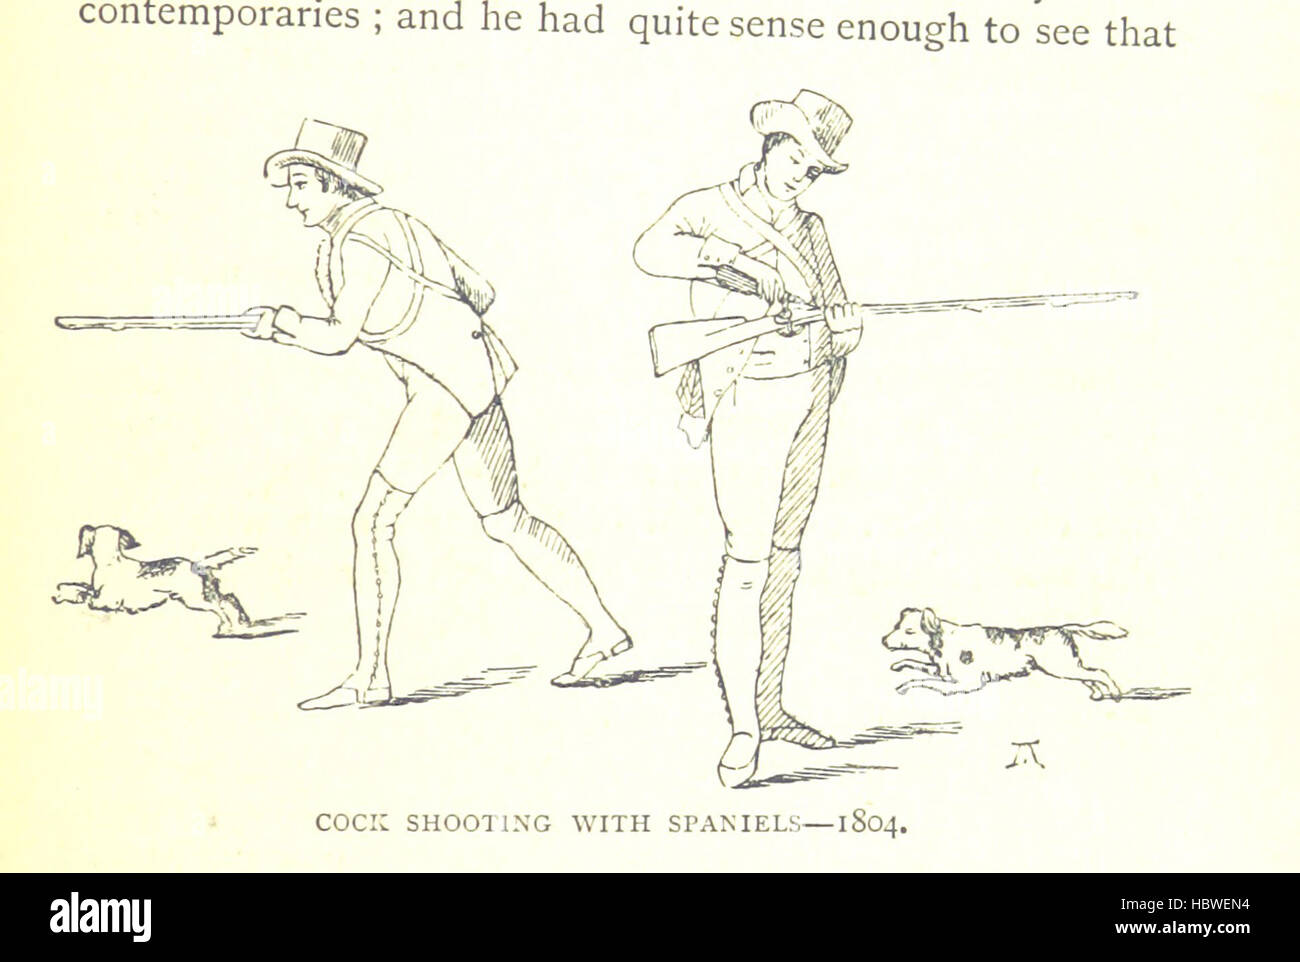 Image taken from page 335 of '[The Dawn of the XIXth Century in England. A social sketch of the times ... With ... illustrations, etc.]' Image taken from page 335 of '[The Dawn of the Stock Photo